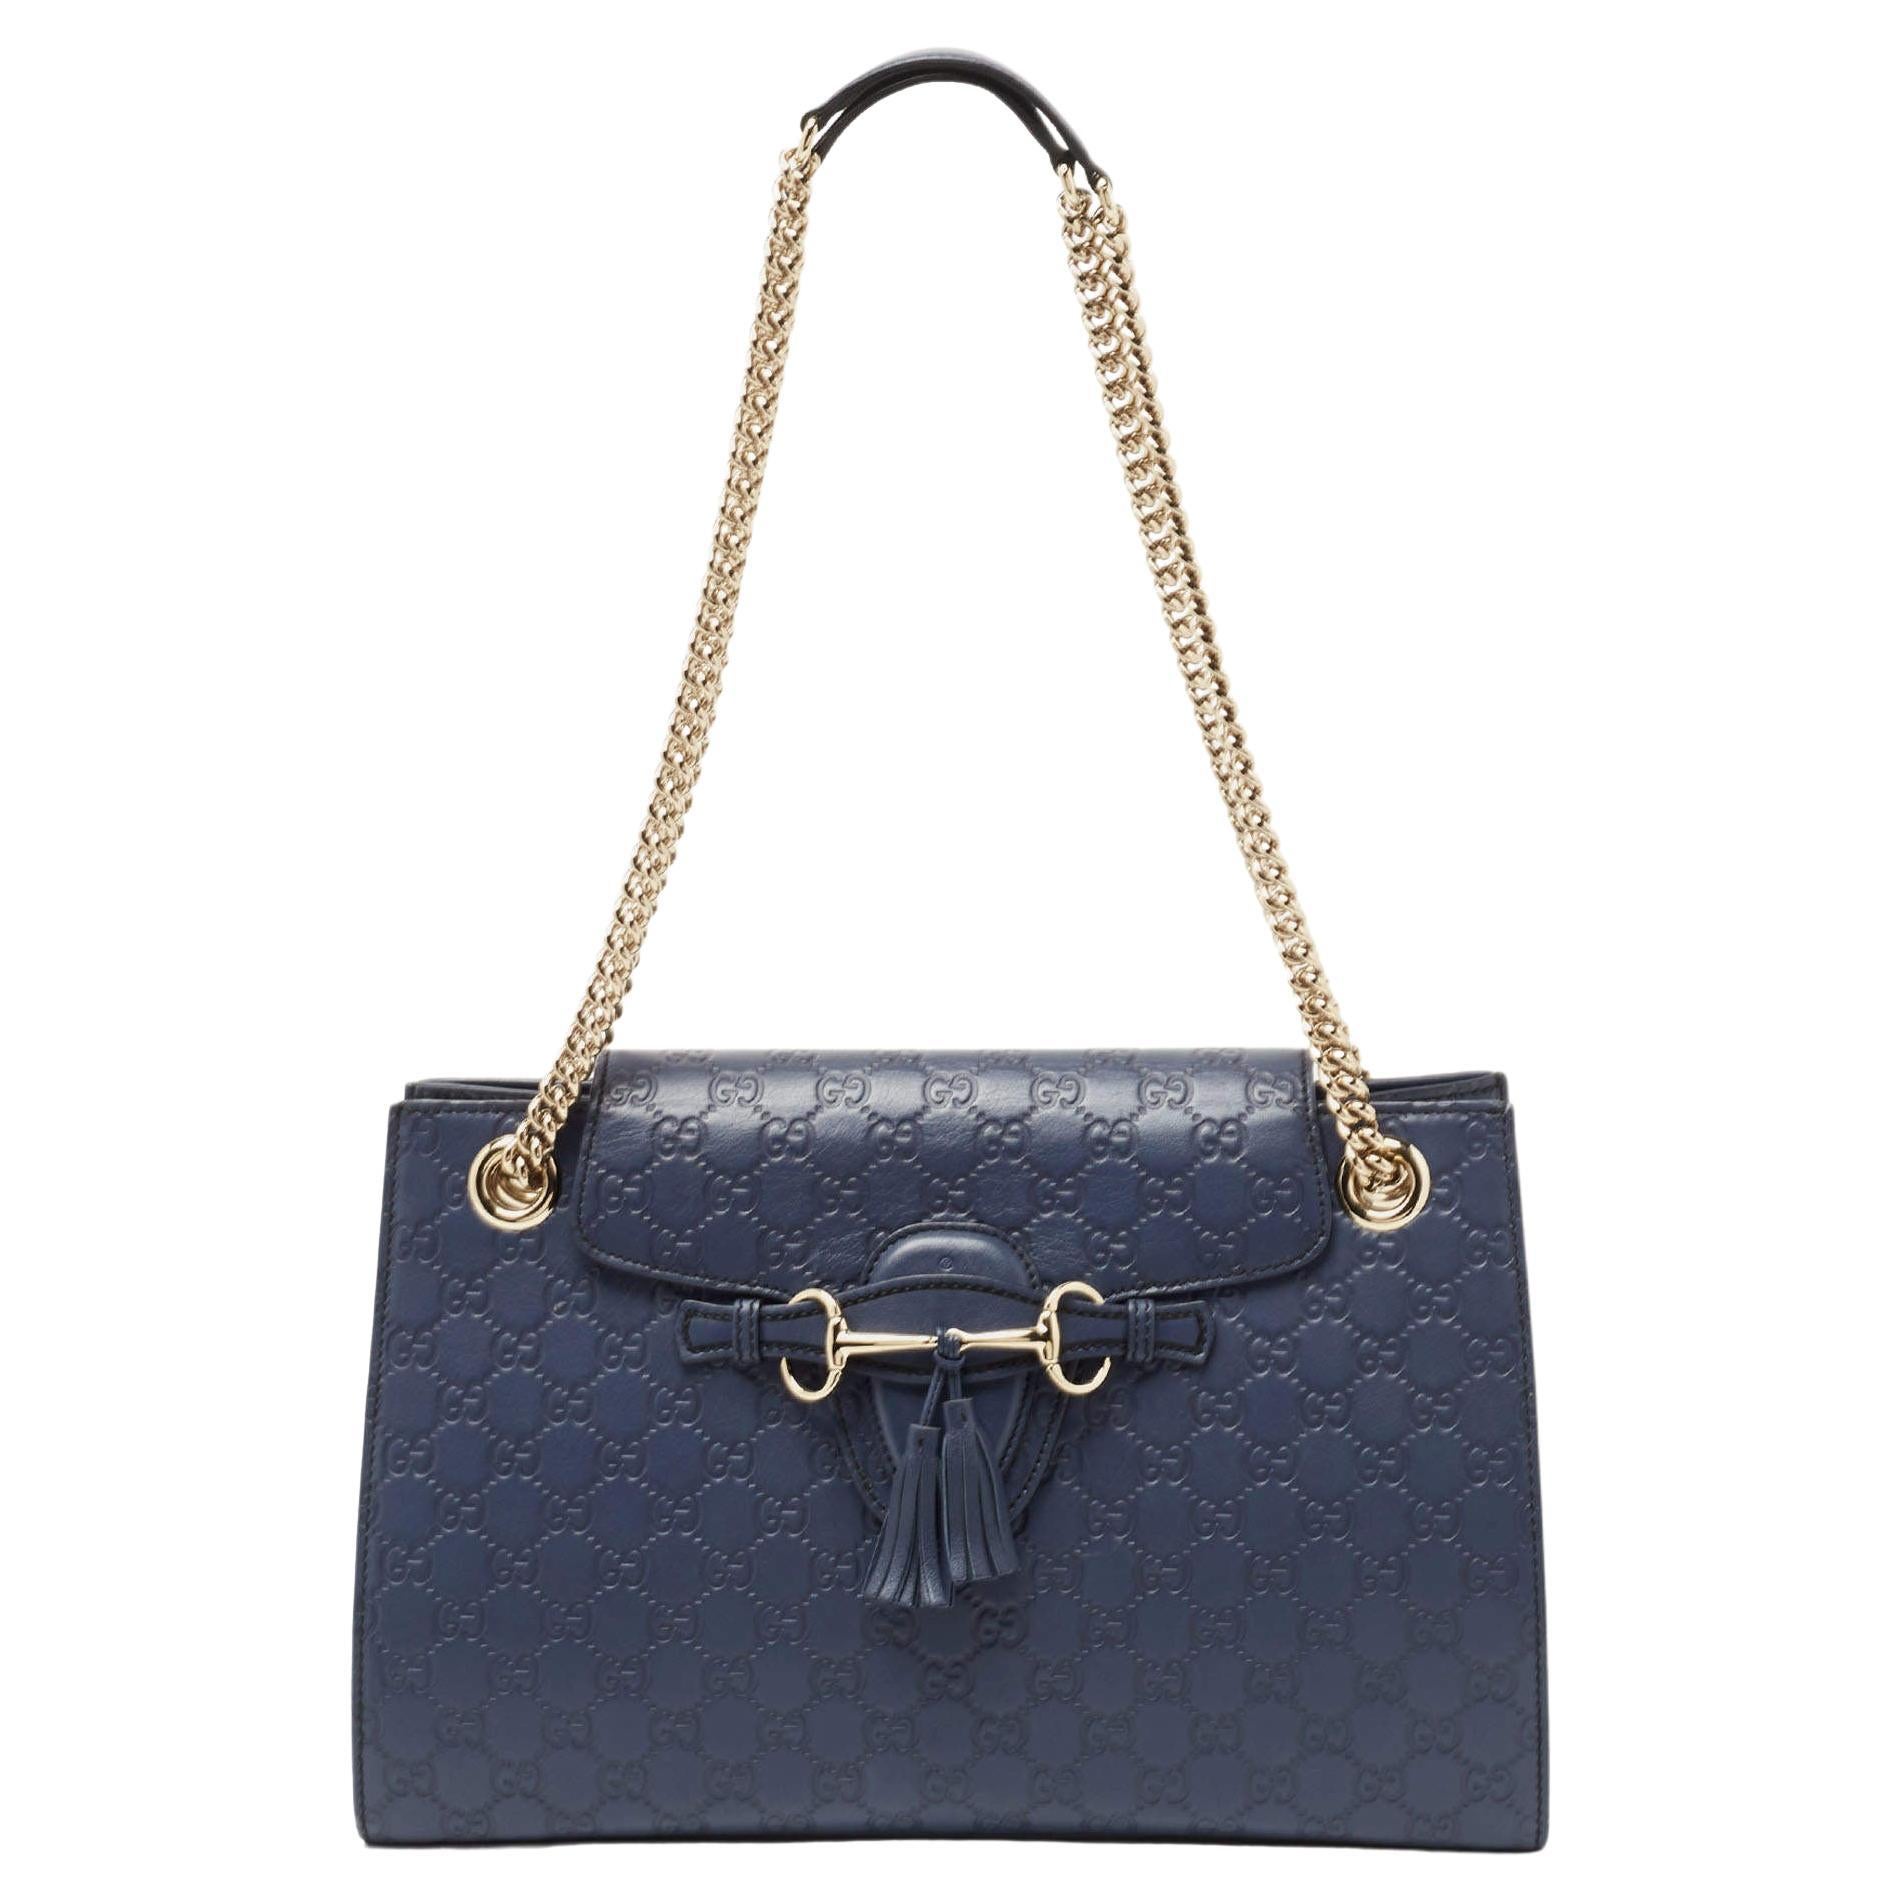 Gucci Dark Blue Guccissima Leather Large Emily Chain Shoulder Bag